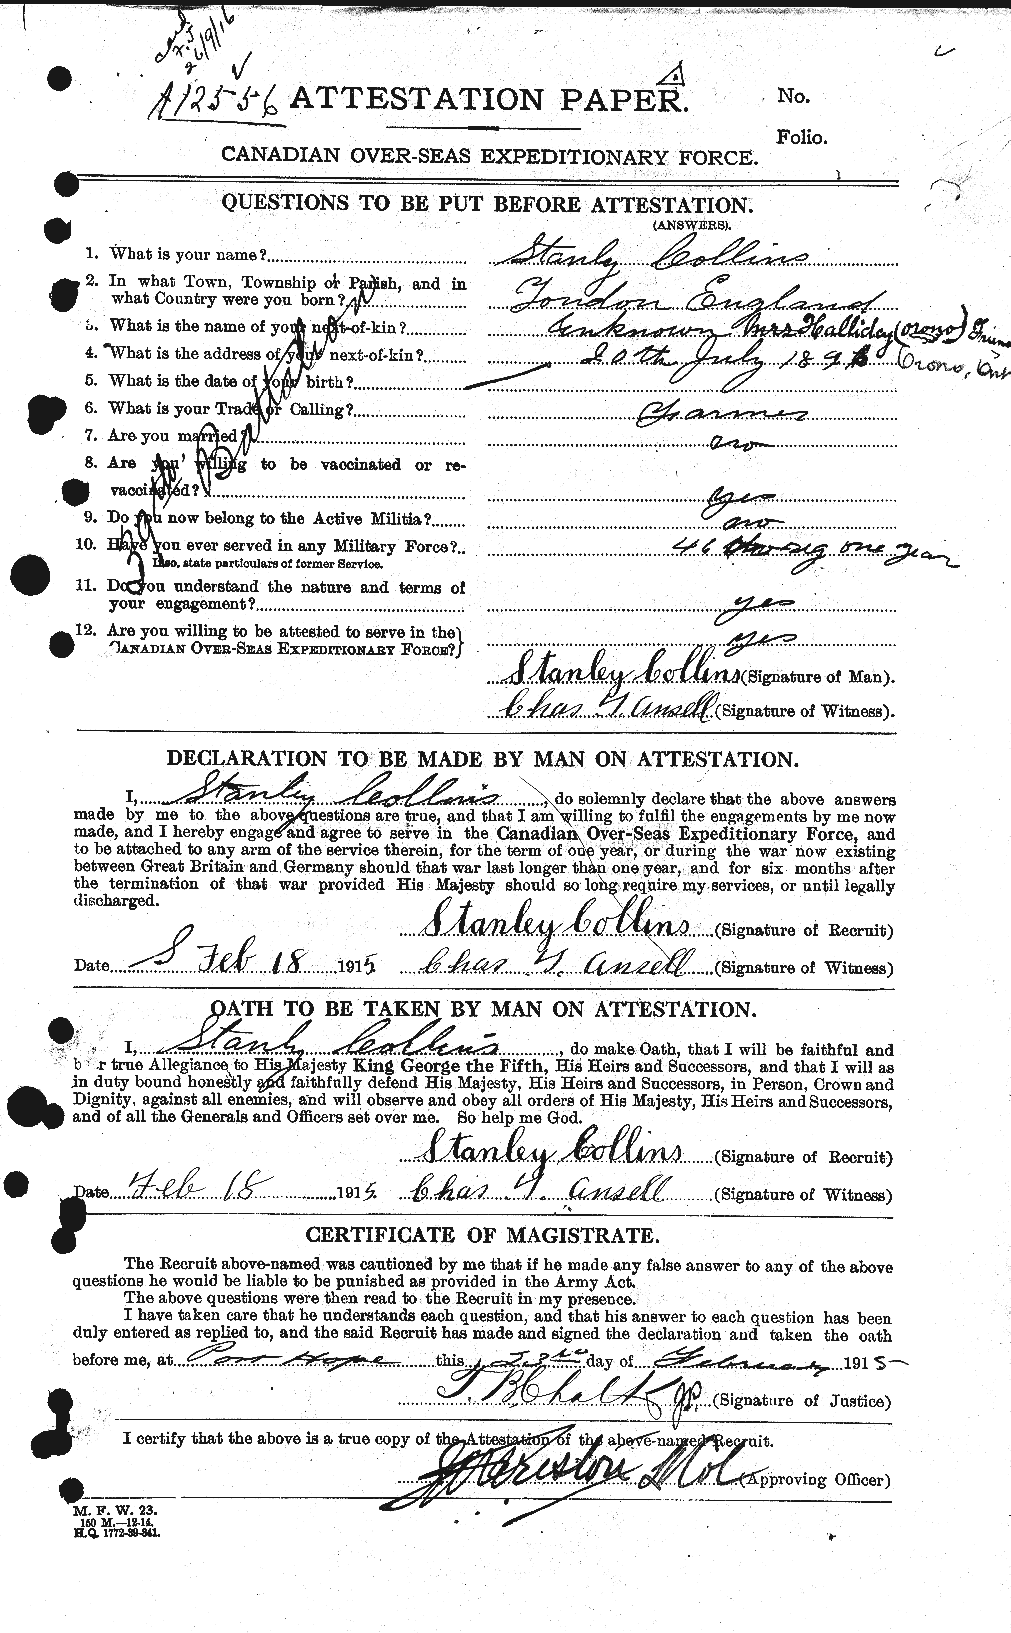 Personnel Records of the First World War - CEF 069153a